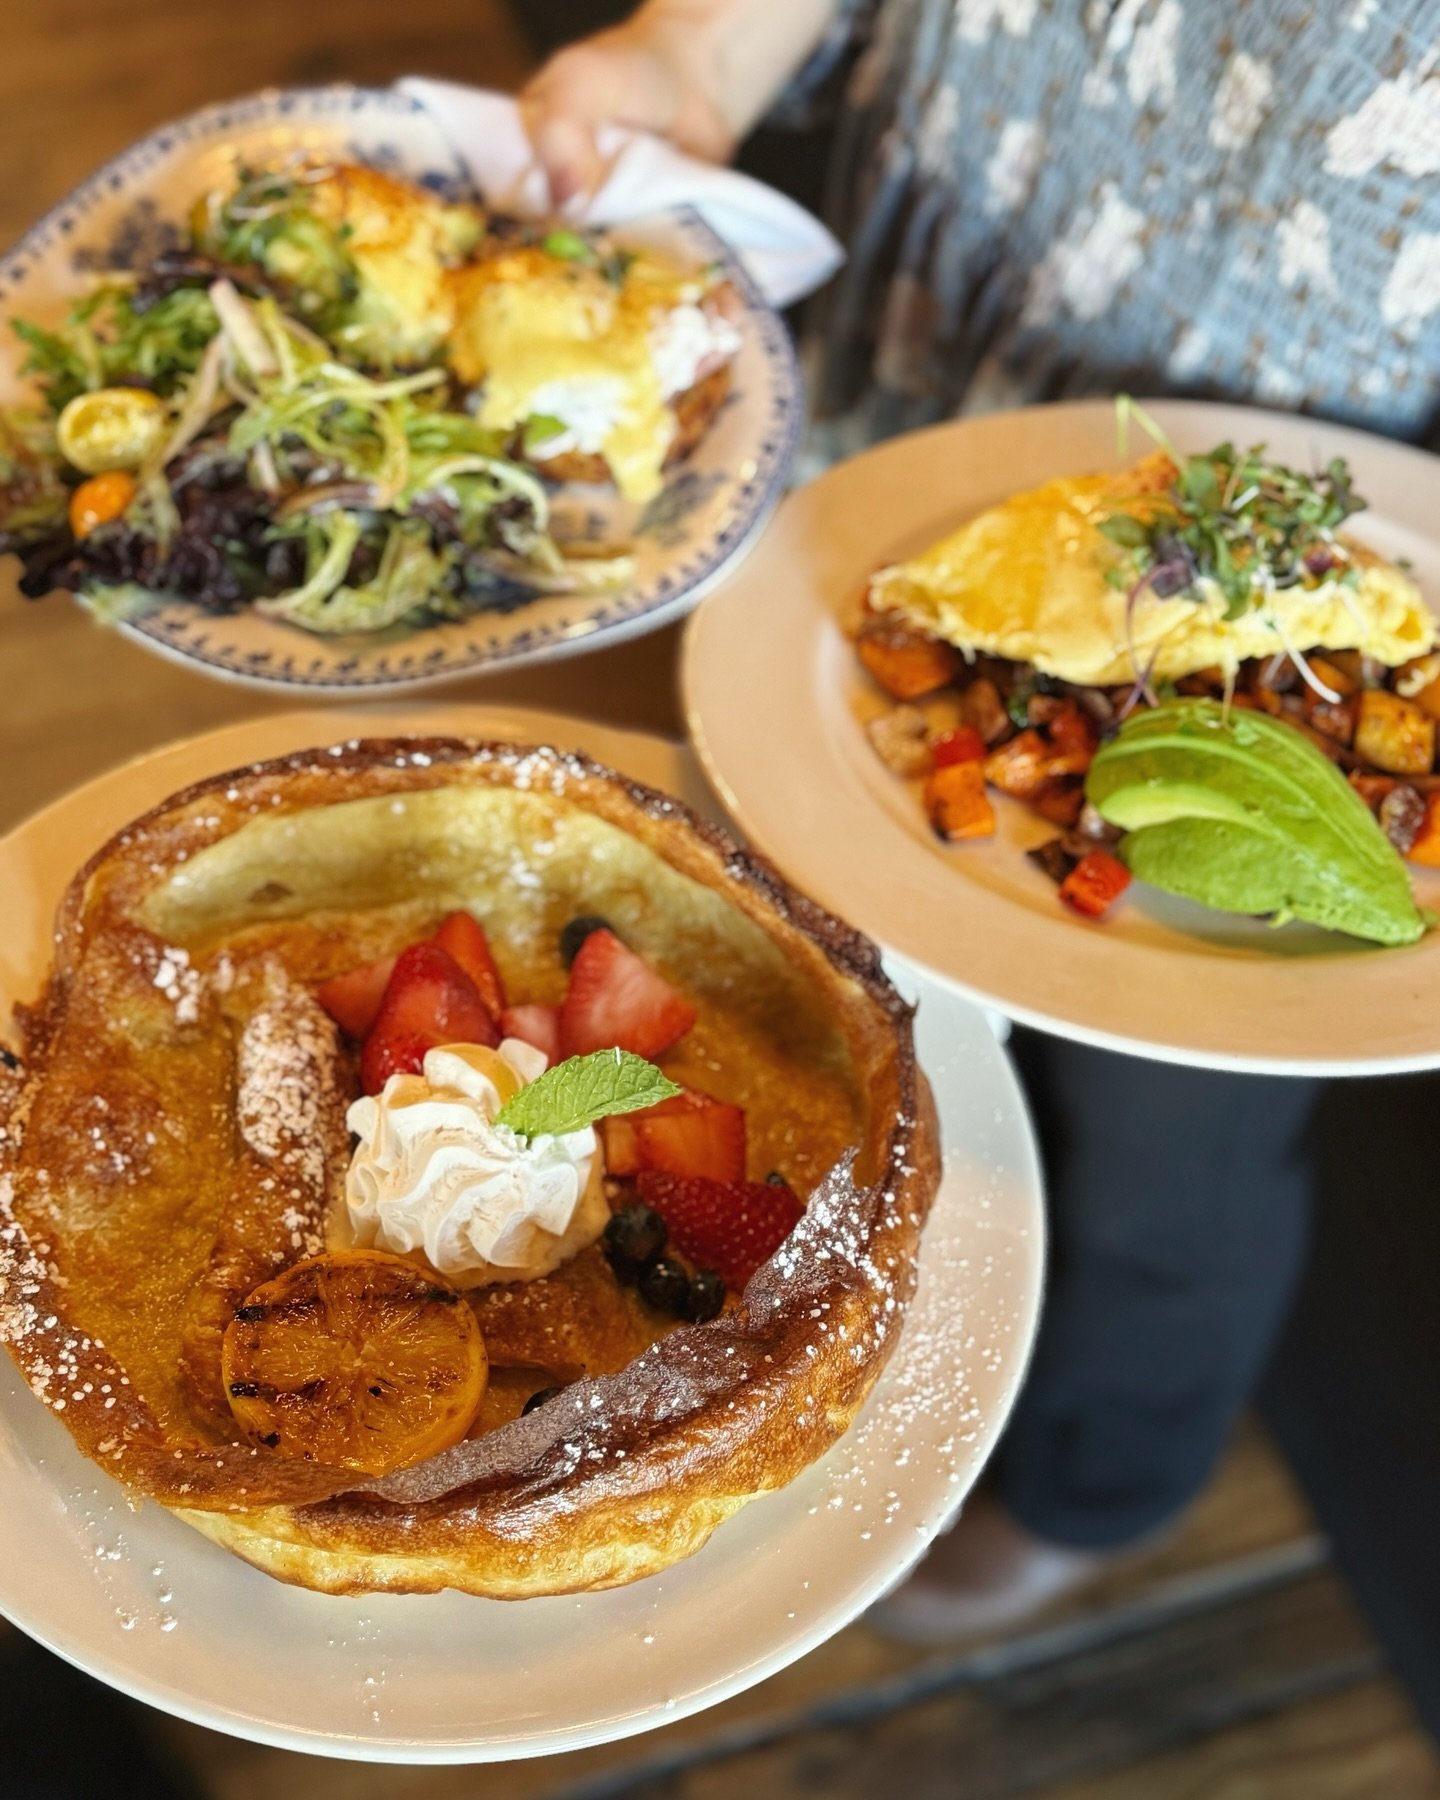 Do you find yourself craving sweet or savory for brunch?